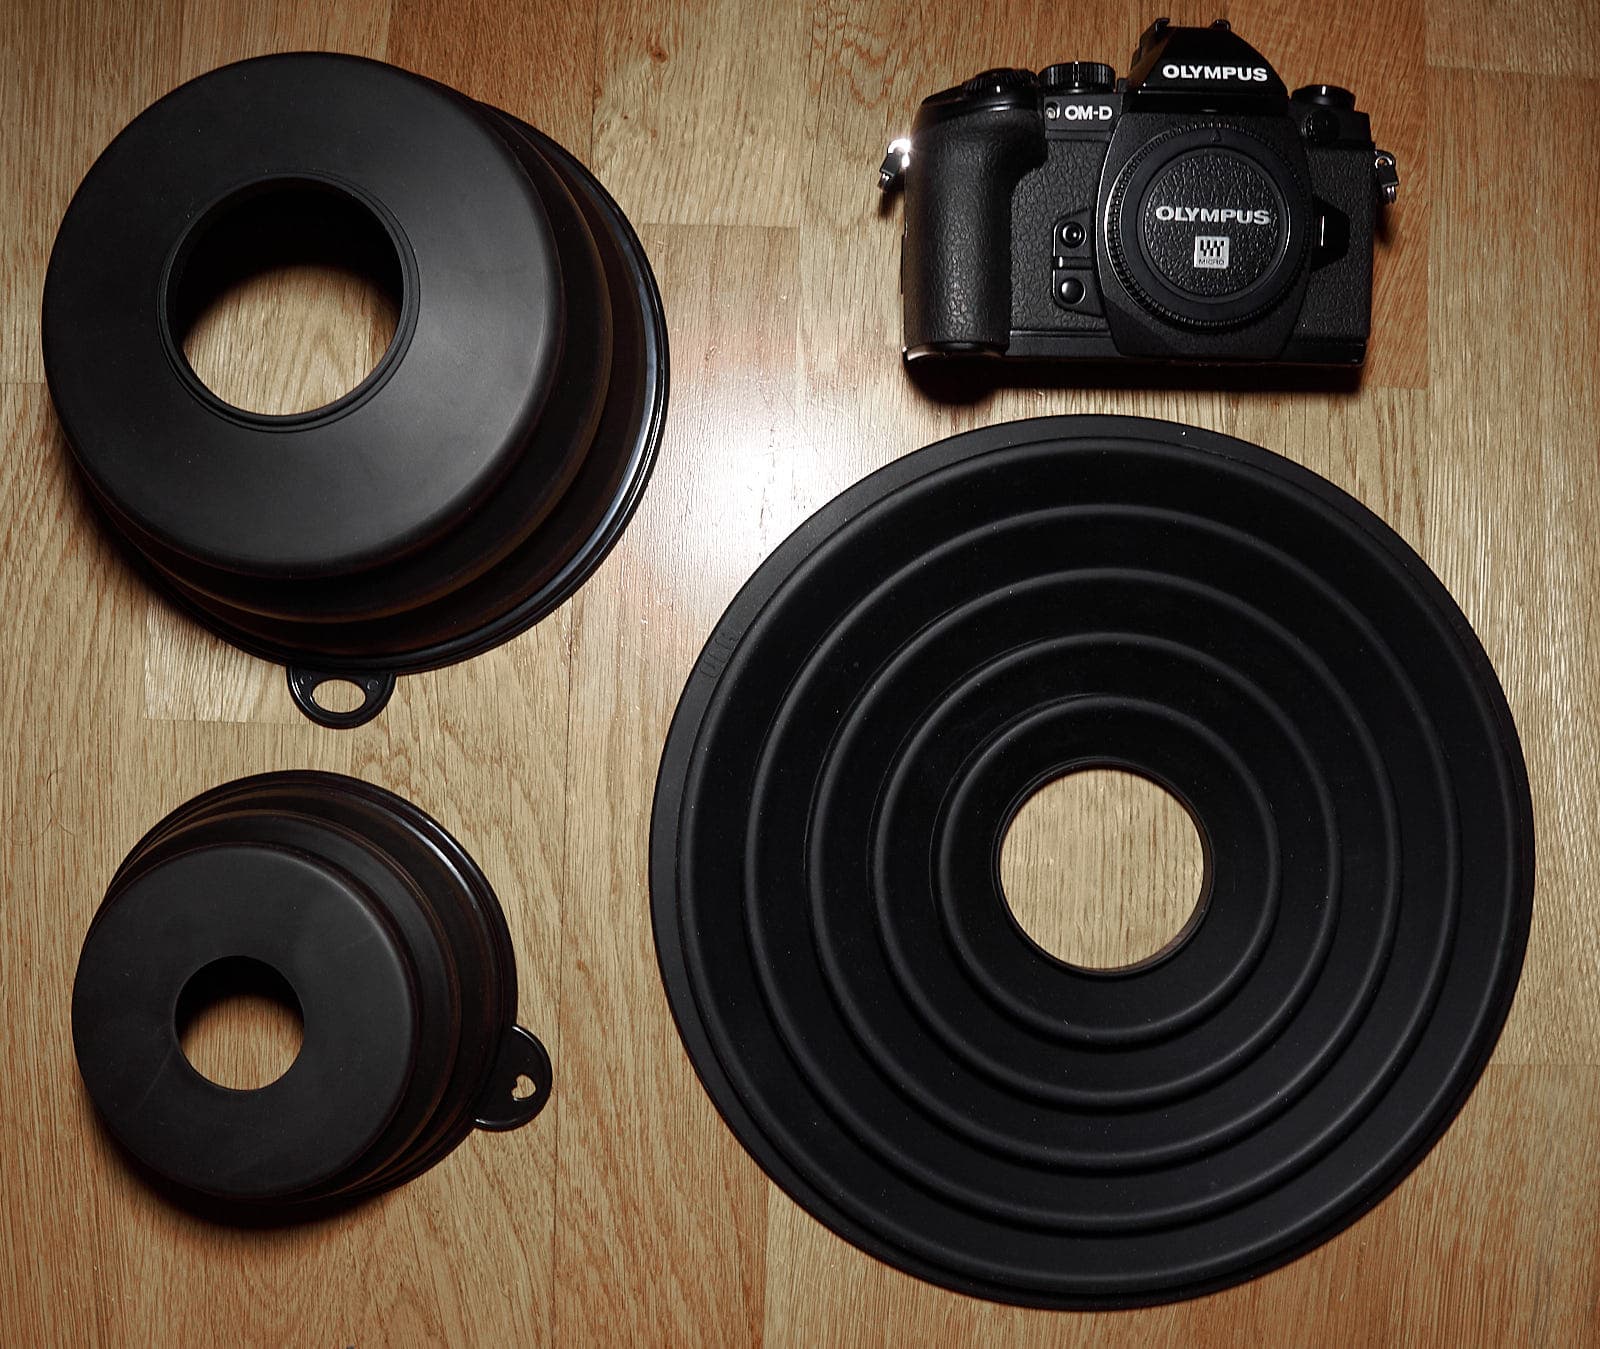 Three oversized lens hoods and a camera. On the left, the large and small lens hoods from AliExpress; on the right, an Olympus E-M1 camera and the Ultimate Lens Hood from KickStarter